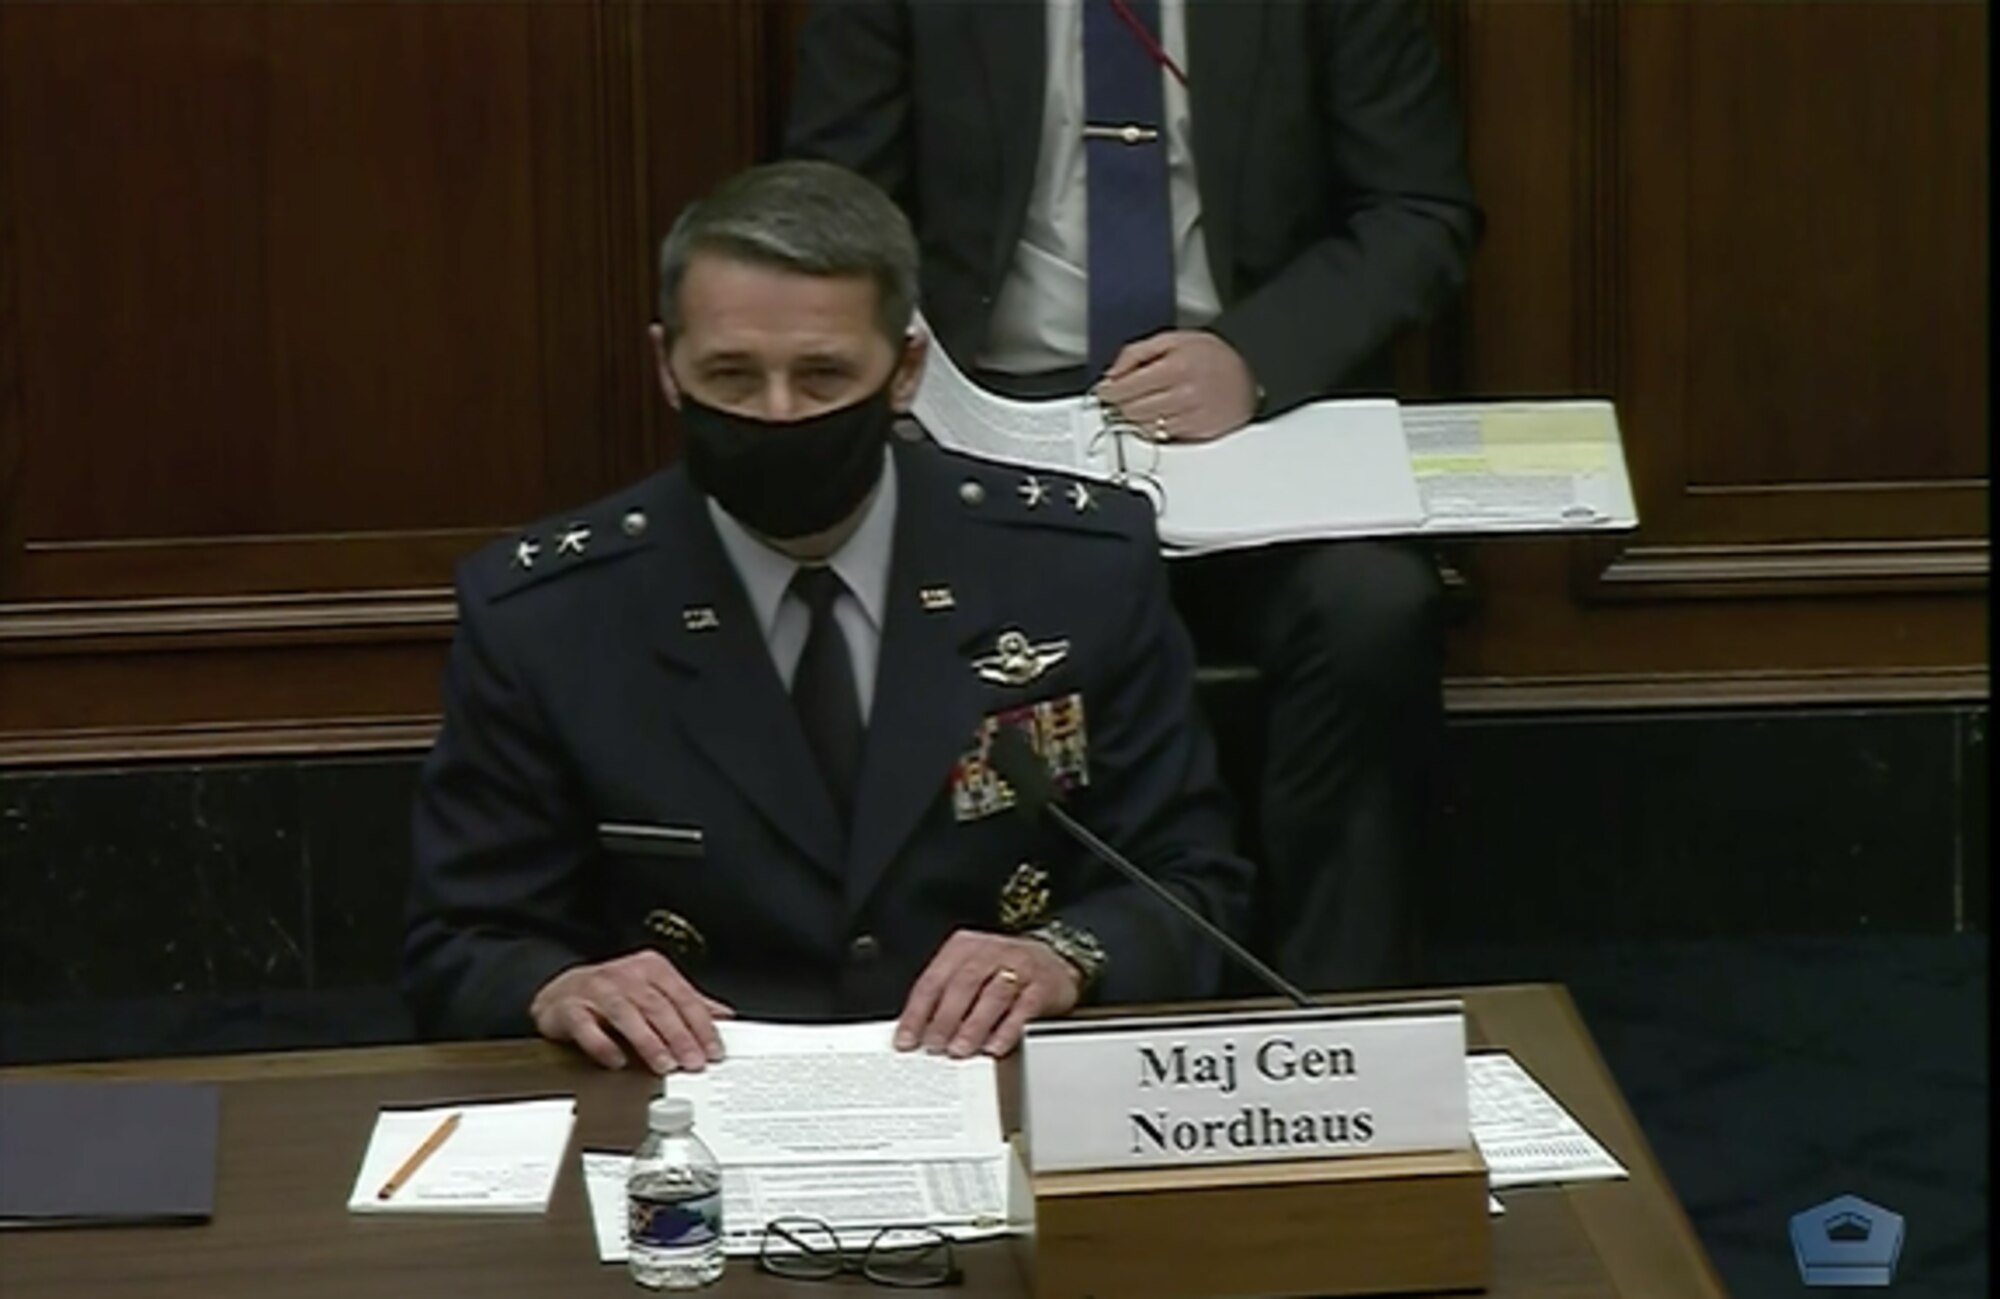 Still image from video of Maj. Gen. Steven S. Nordhaus, director of operations at the National Guard Bureau, testifying before the House Armed Services Committee in Washington, Feb. 17, 2021. Nordhaus told the committee the Guard is vaccinating about 72,000 people a day across the country.